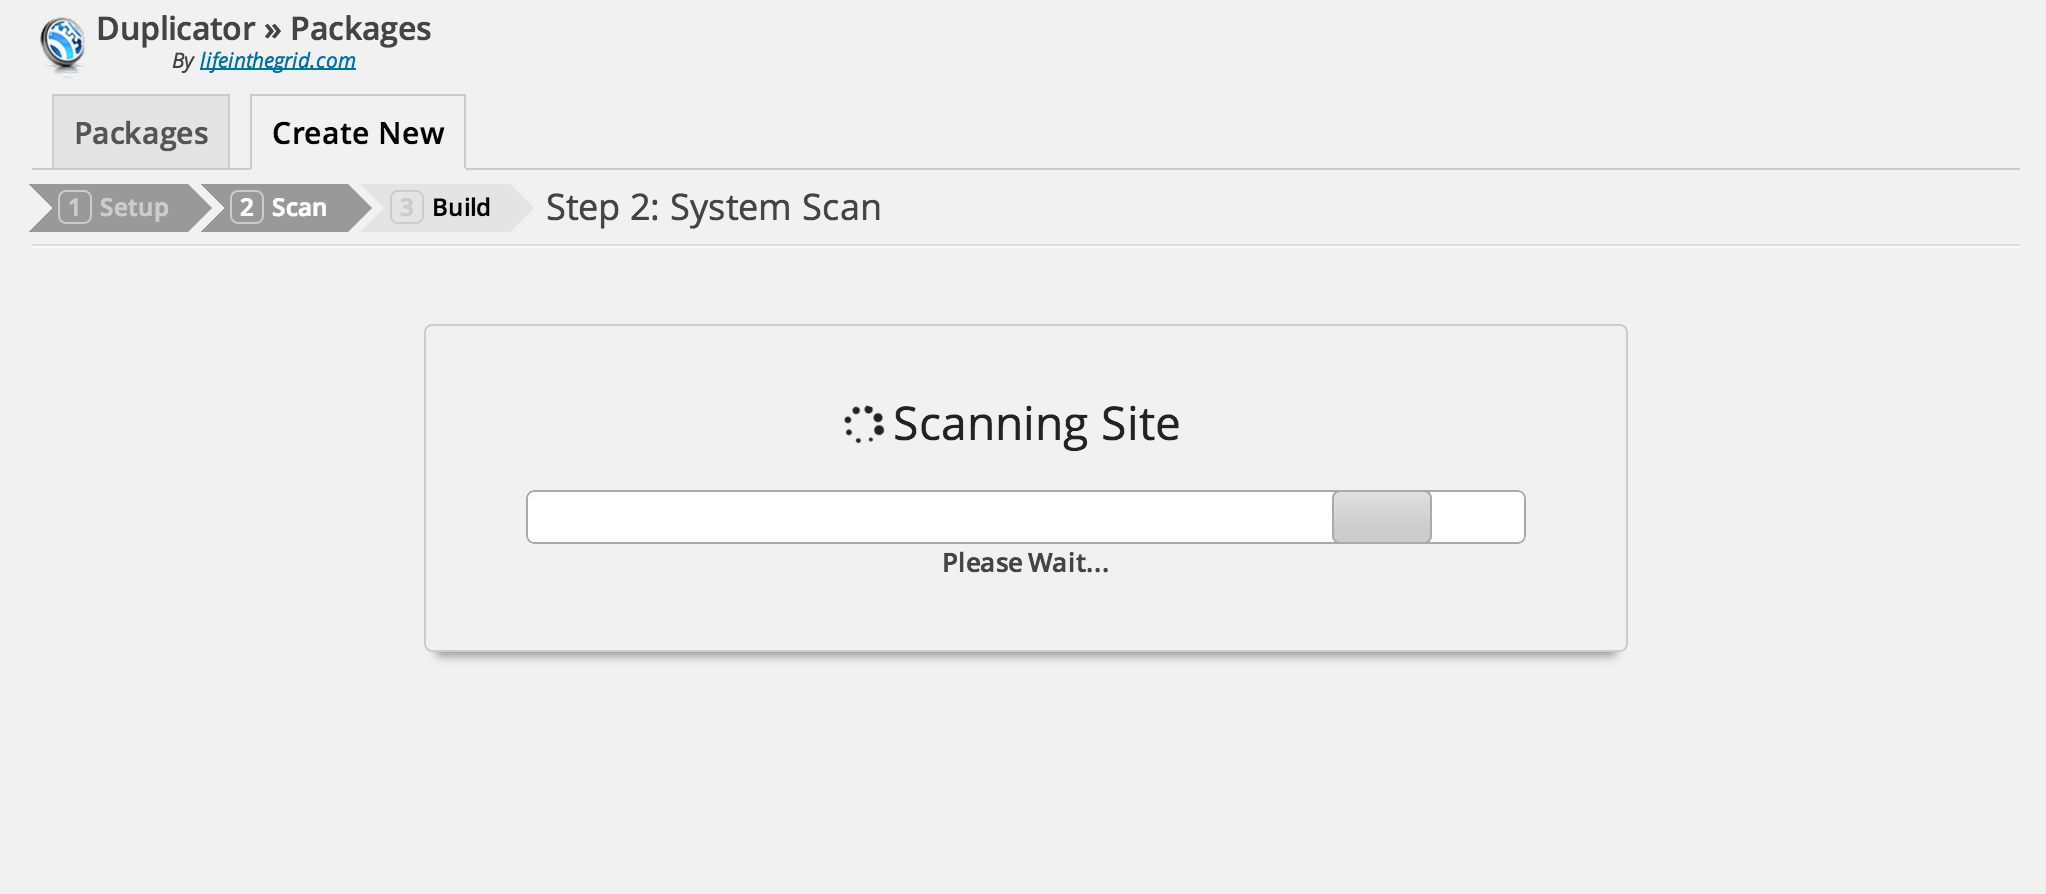 Wait for Duplicator to do a System Scan